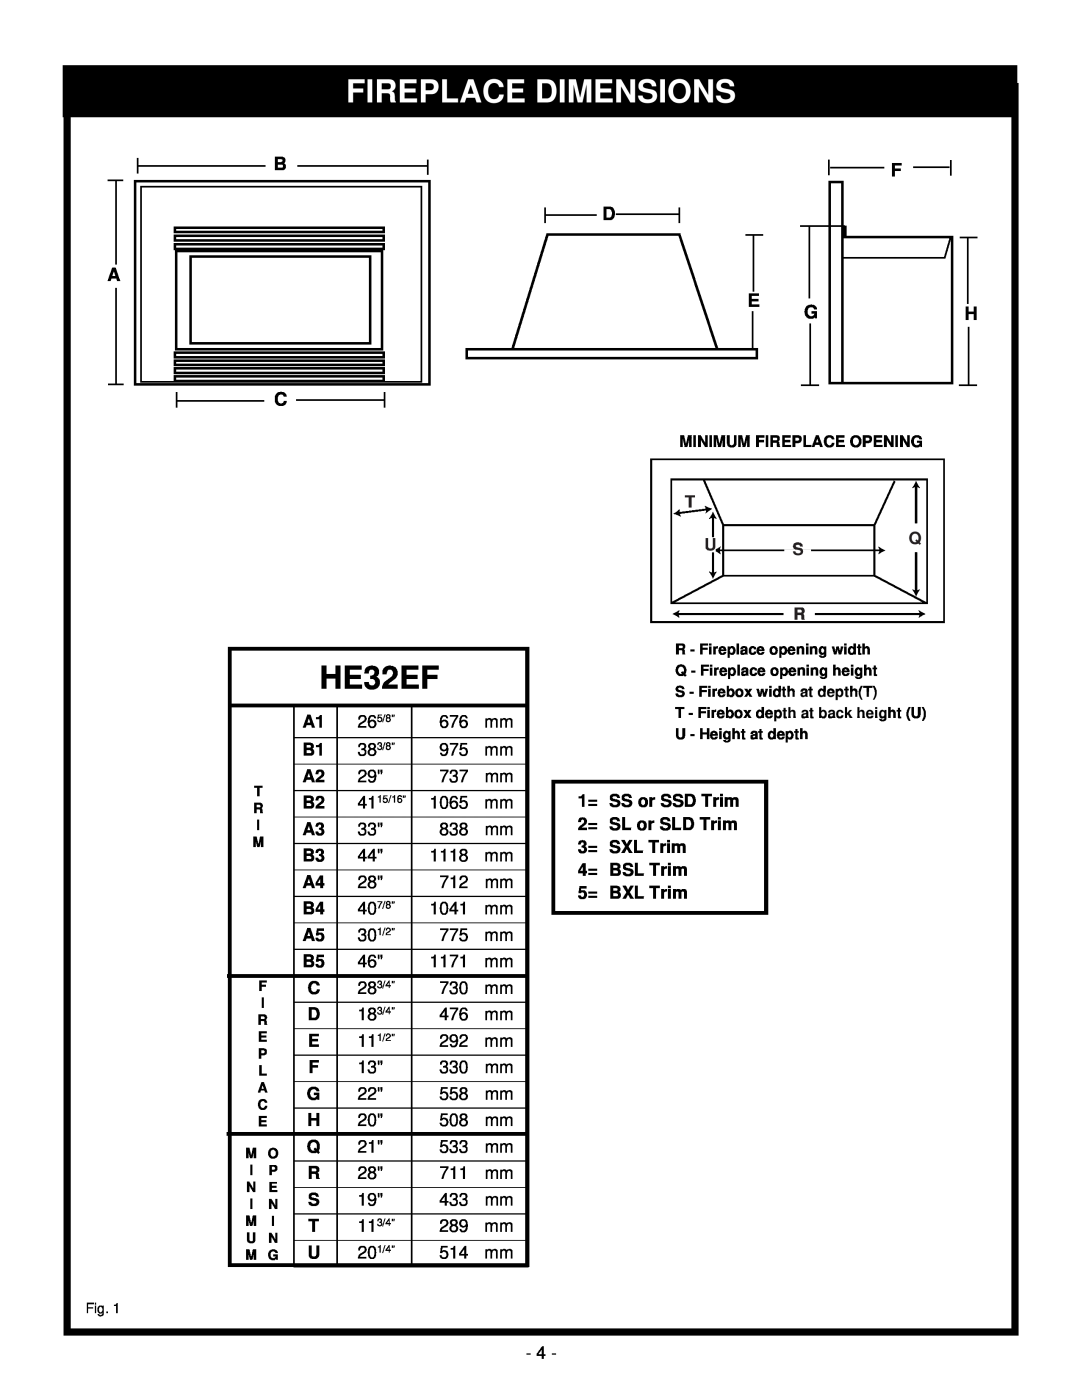 Majestic Appliances HE32EF installation instructions Fireplace Dimensions 